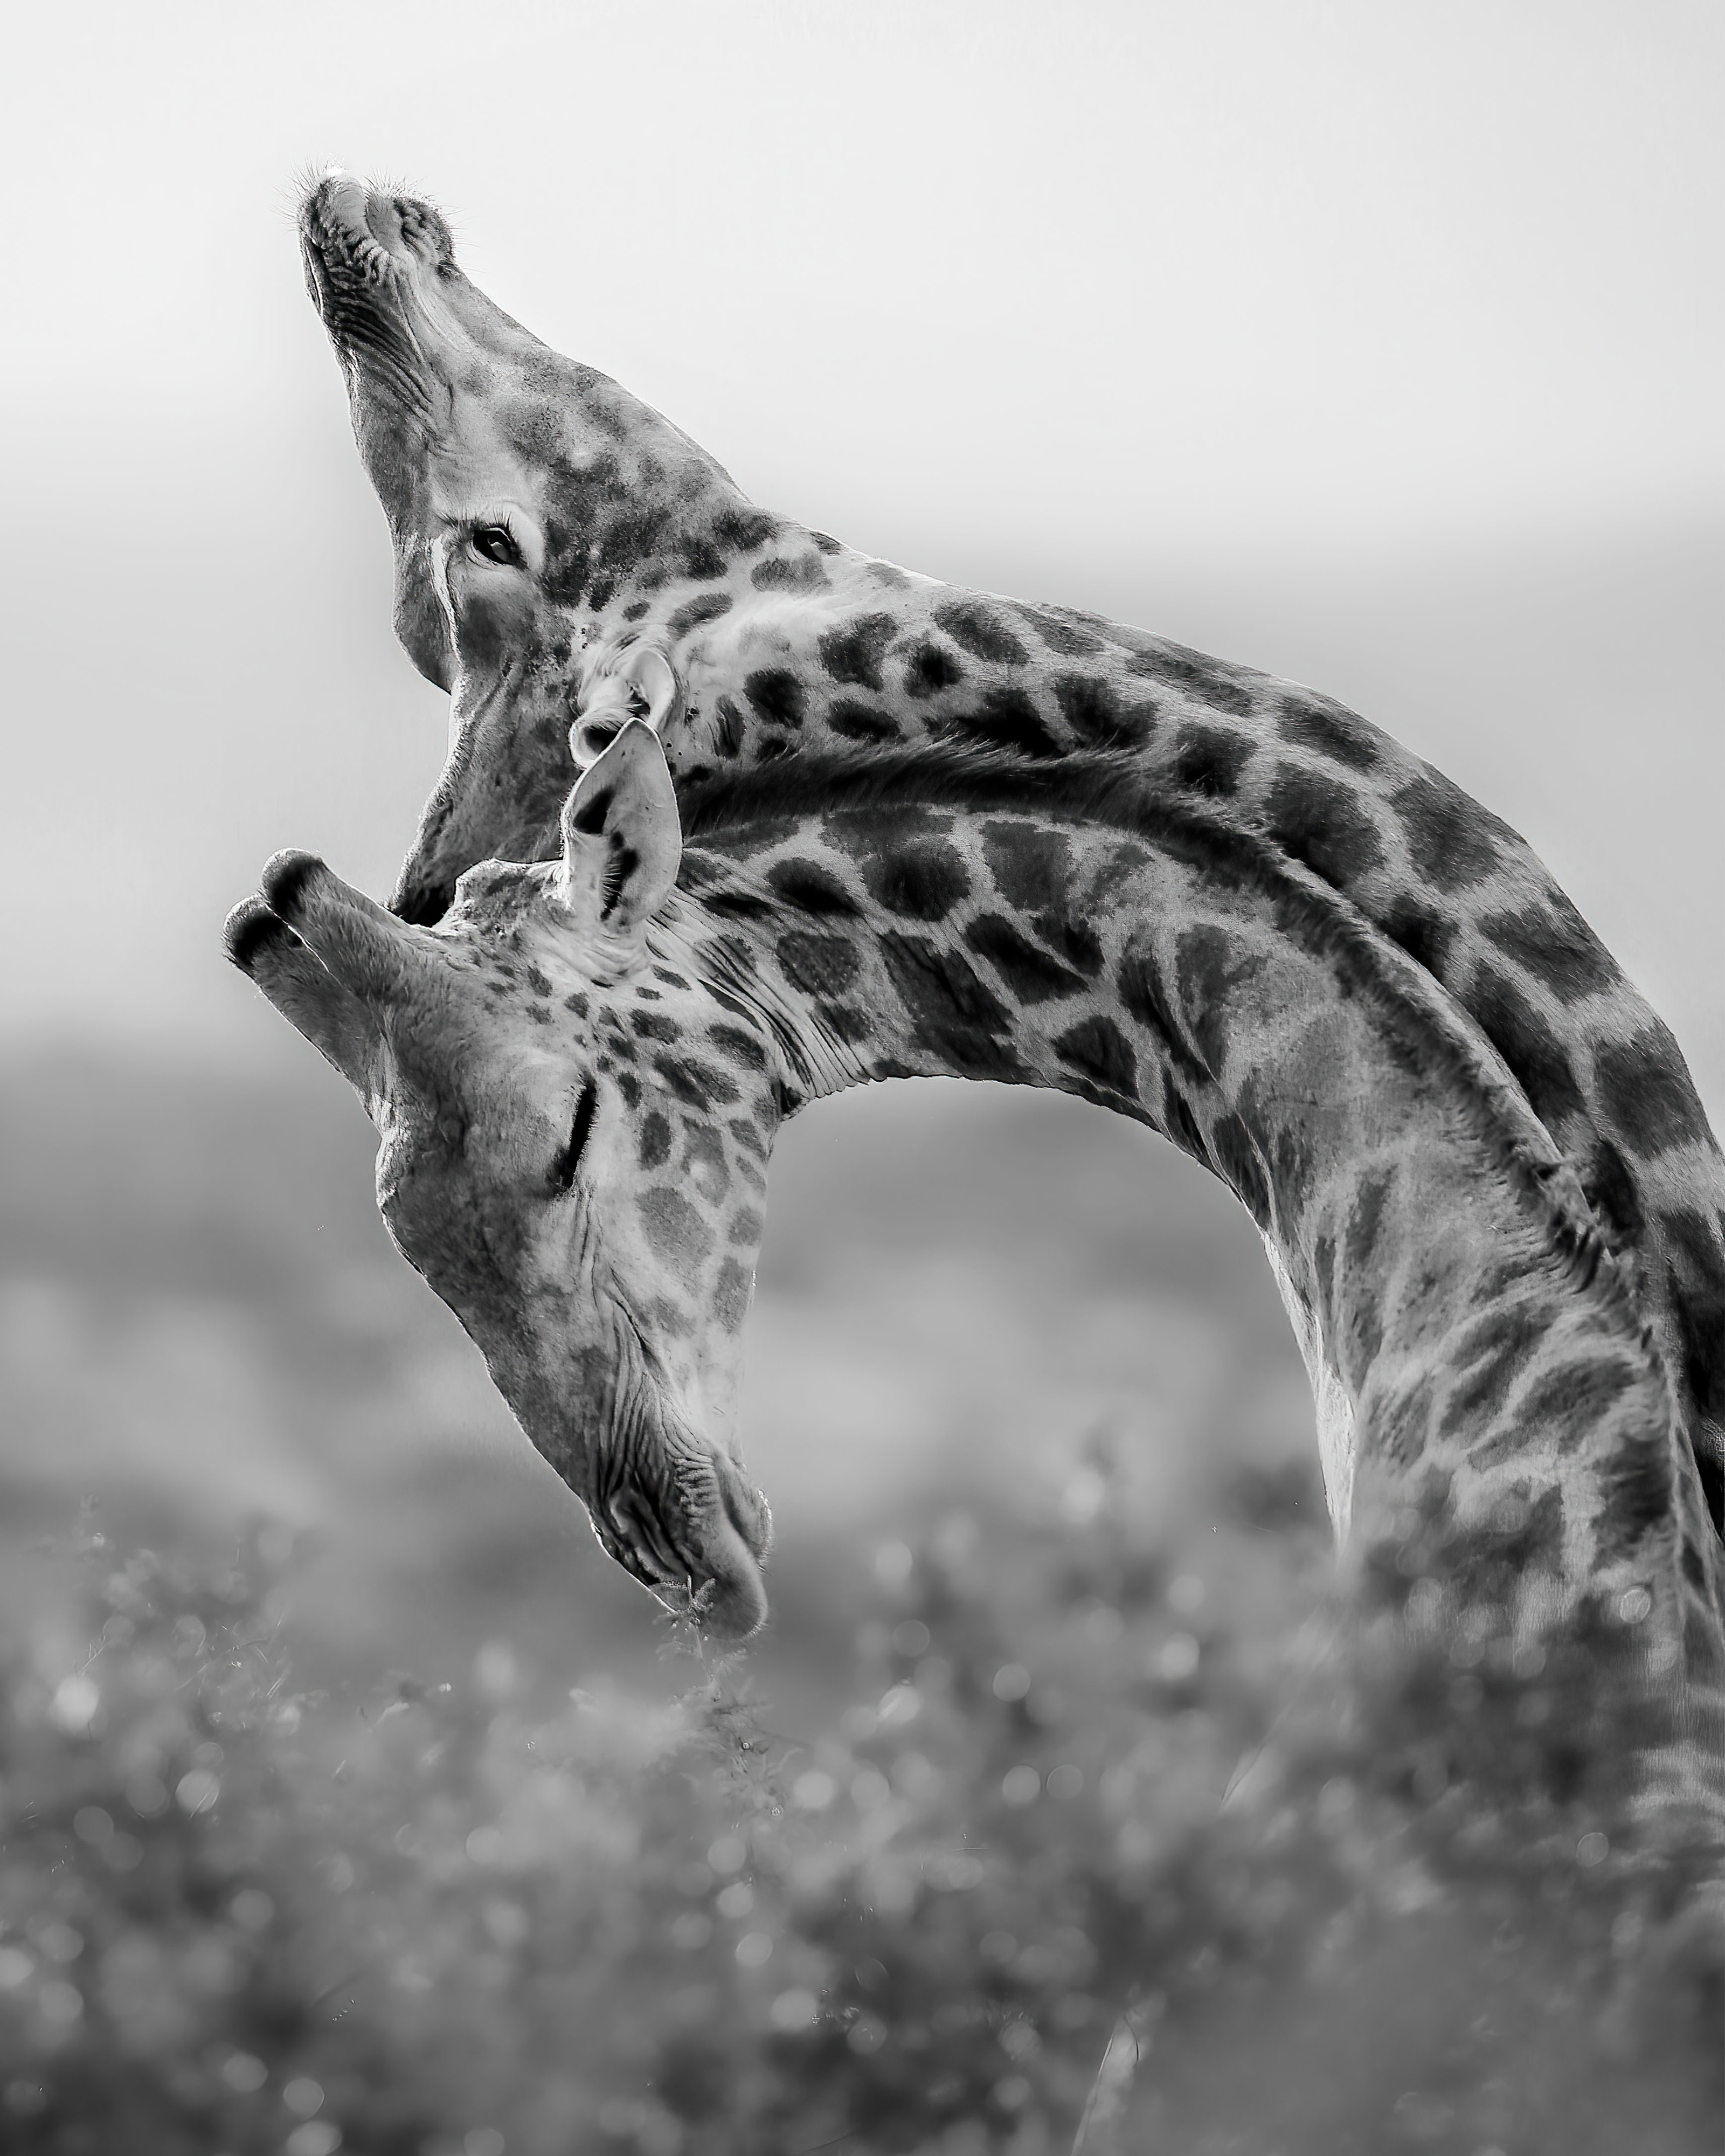 'A Giant's Ballet'. During my time studying the African painted dog in South Africa, we came across these two young bull giraffes “necking” – which is their form of sparring or fighting. Most people think when they see this photo that it is a sign of affection, but once they read the description, the context becomes very different. © Torie Hilley/TNC Photo Contest